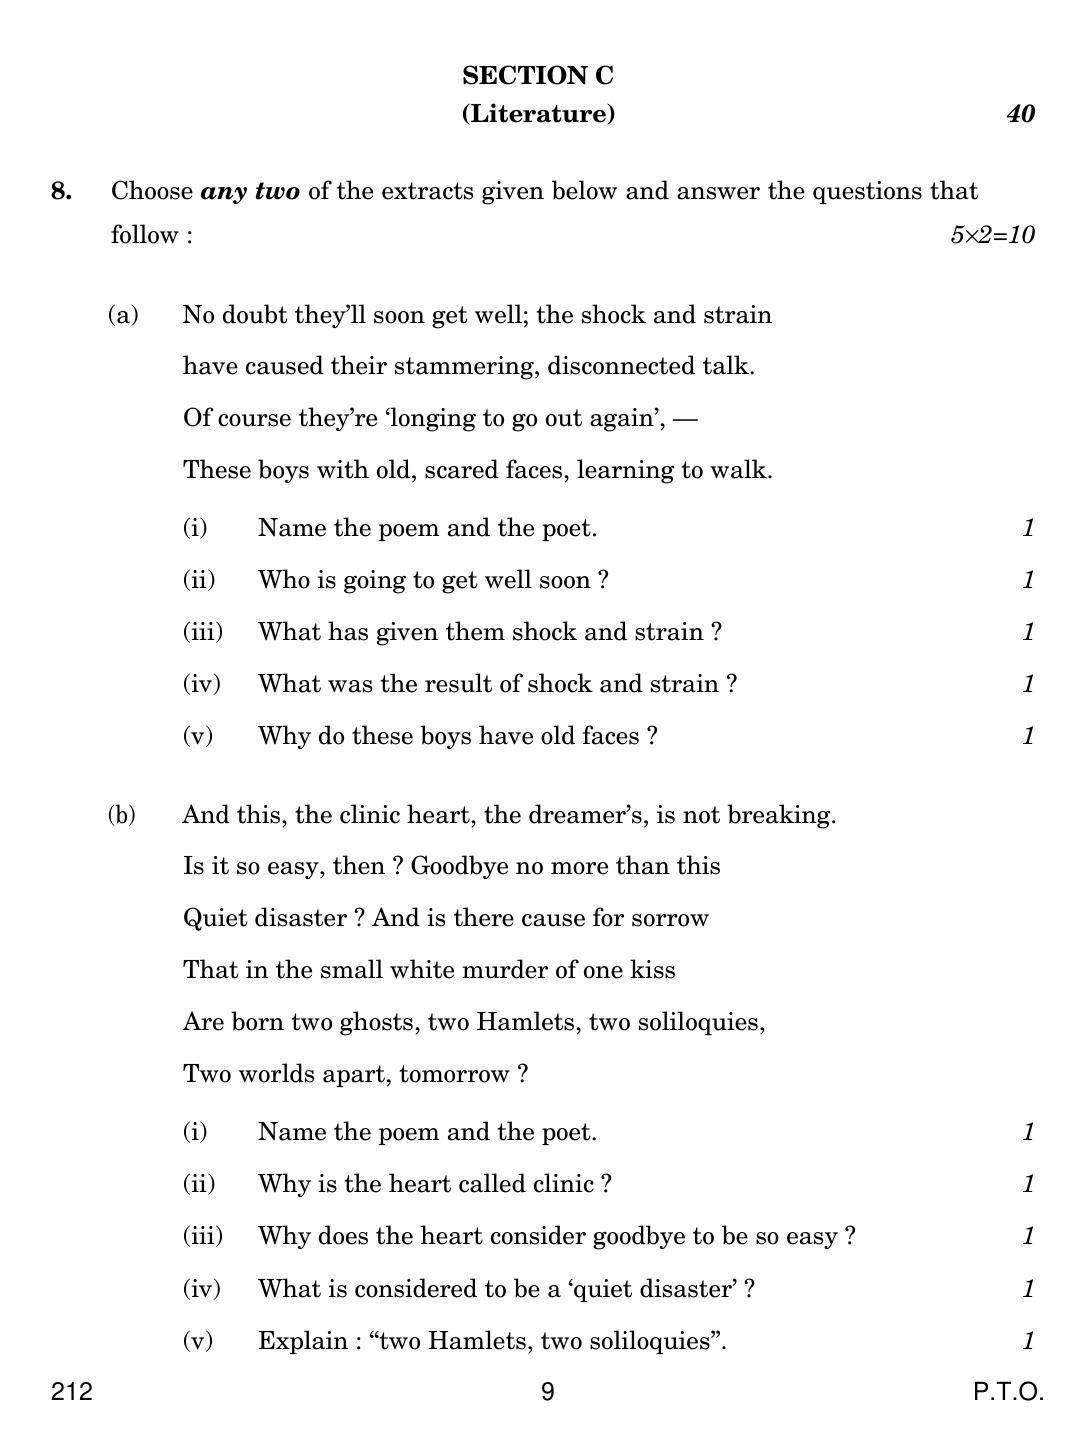 CBSE Class 12 212 ENGLISH ELECTIVE - C 2019 Compartment Question Paper - Page 9